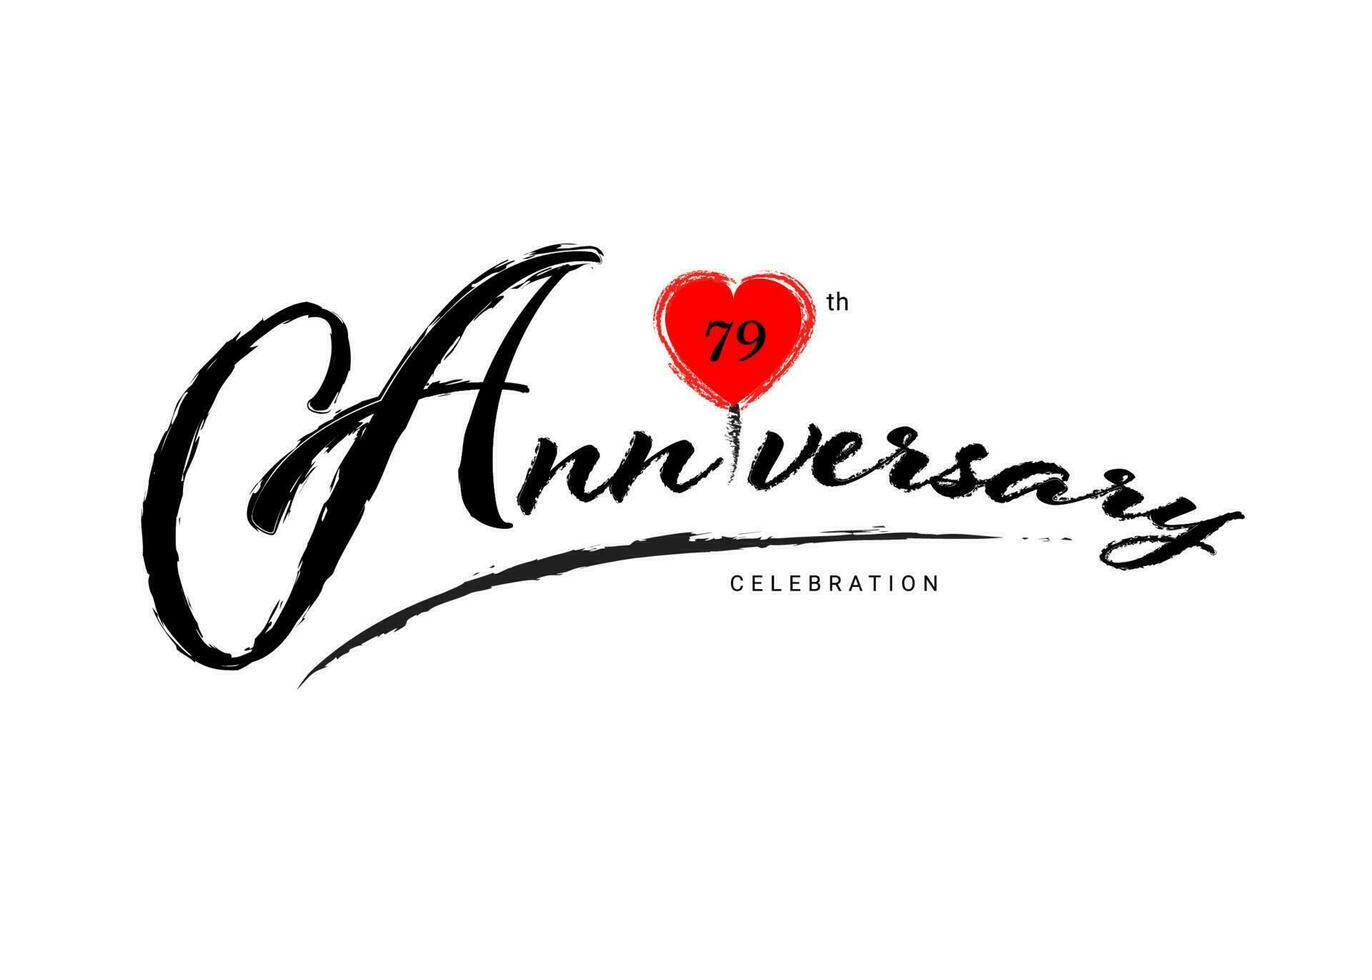 79 Years Anniversary Celebration logo with red heart vector, 79 number logo design, 79th Birthday Logo, happy Anniversary, Vector Anniversary For Celebration, poster, Invitation Card